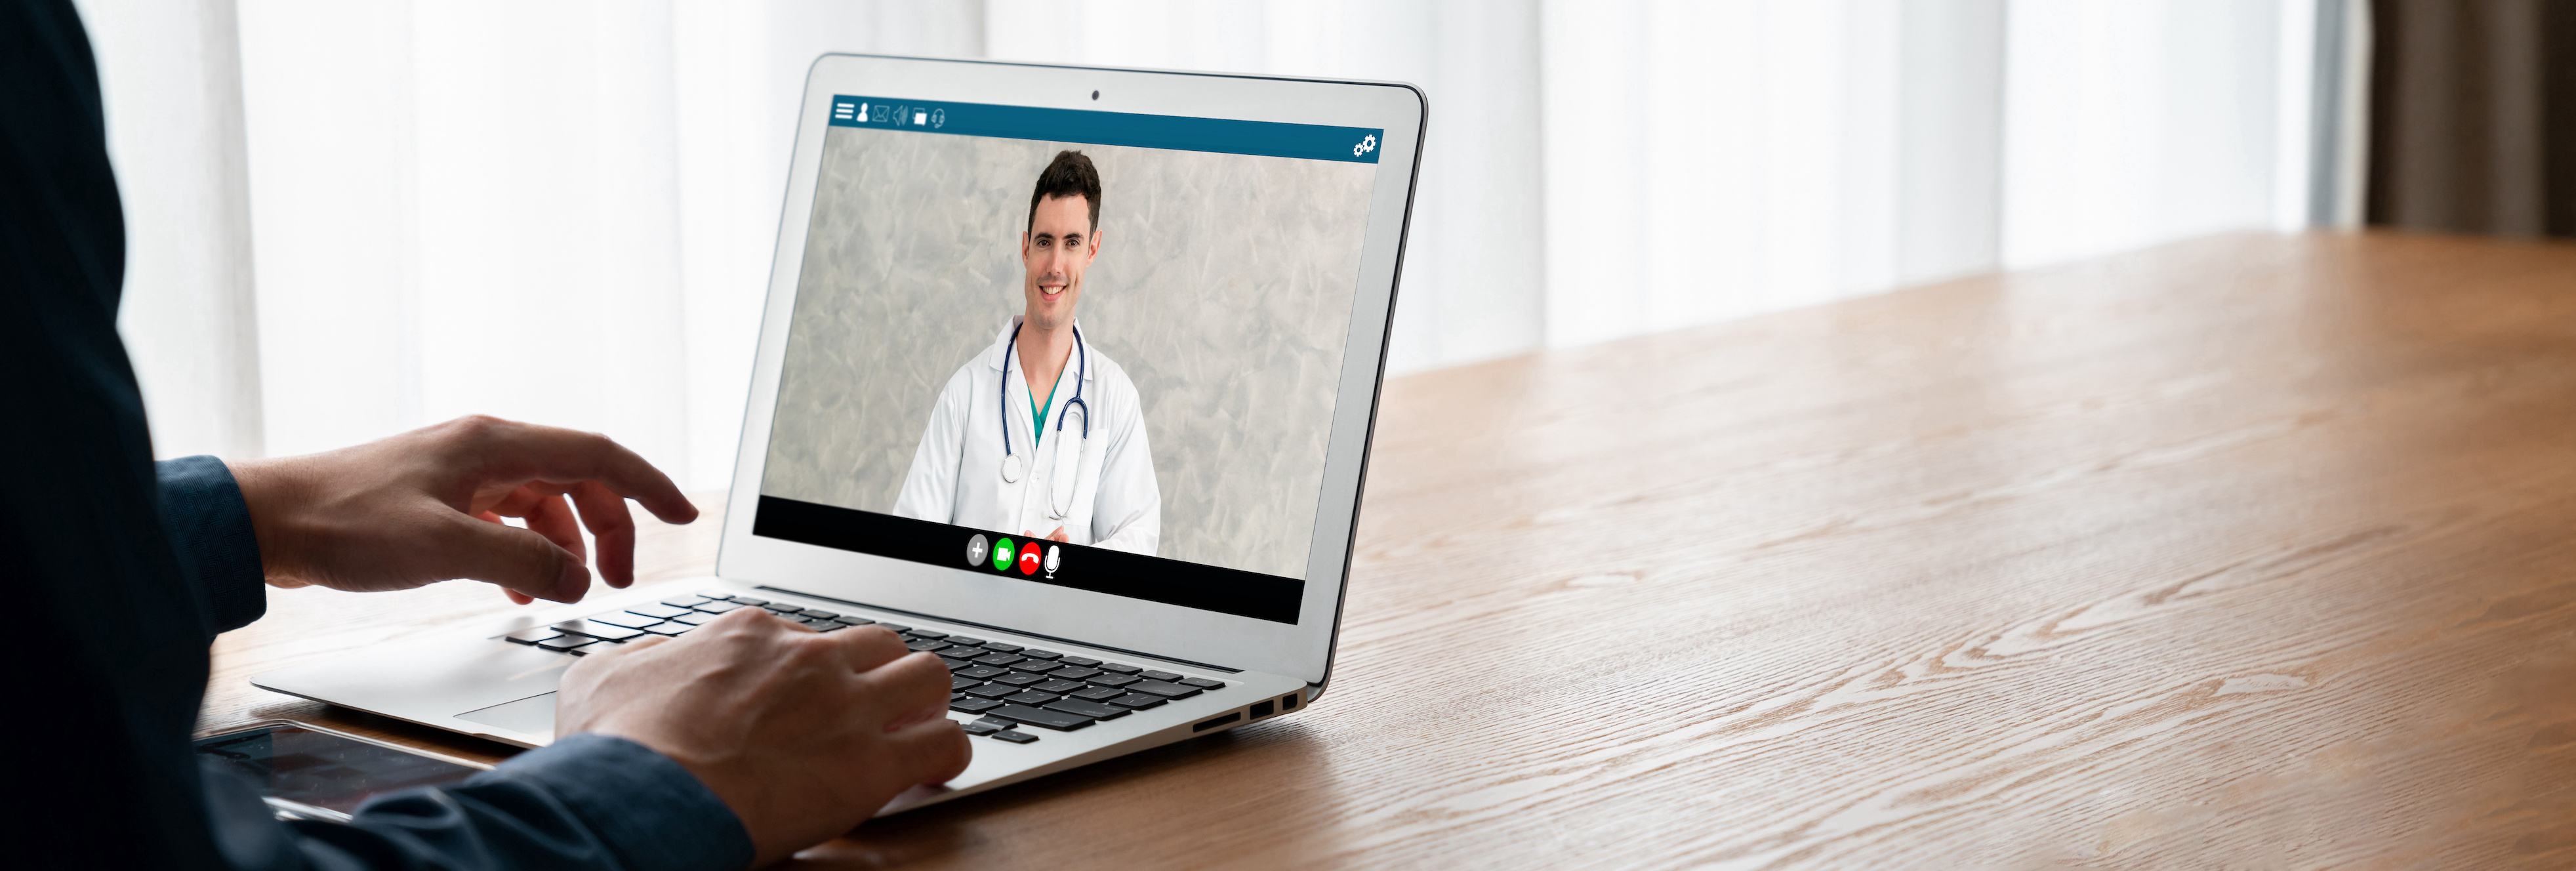 photo of a person on a video call with a doctor